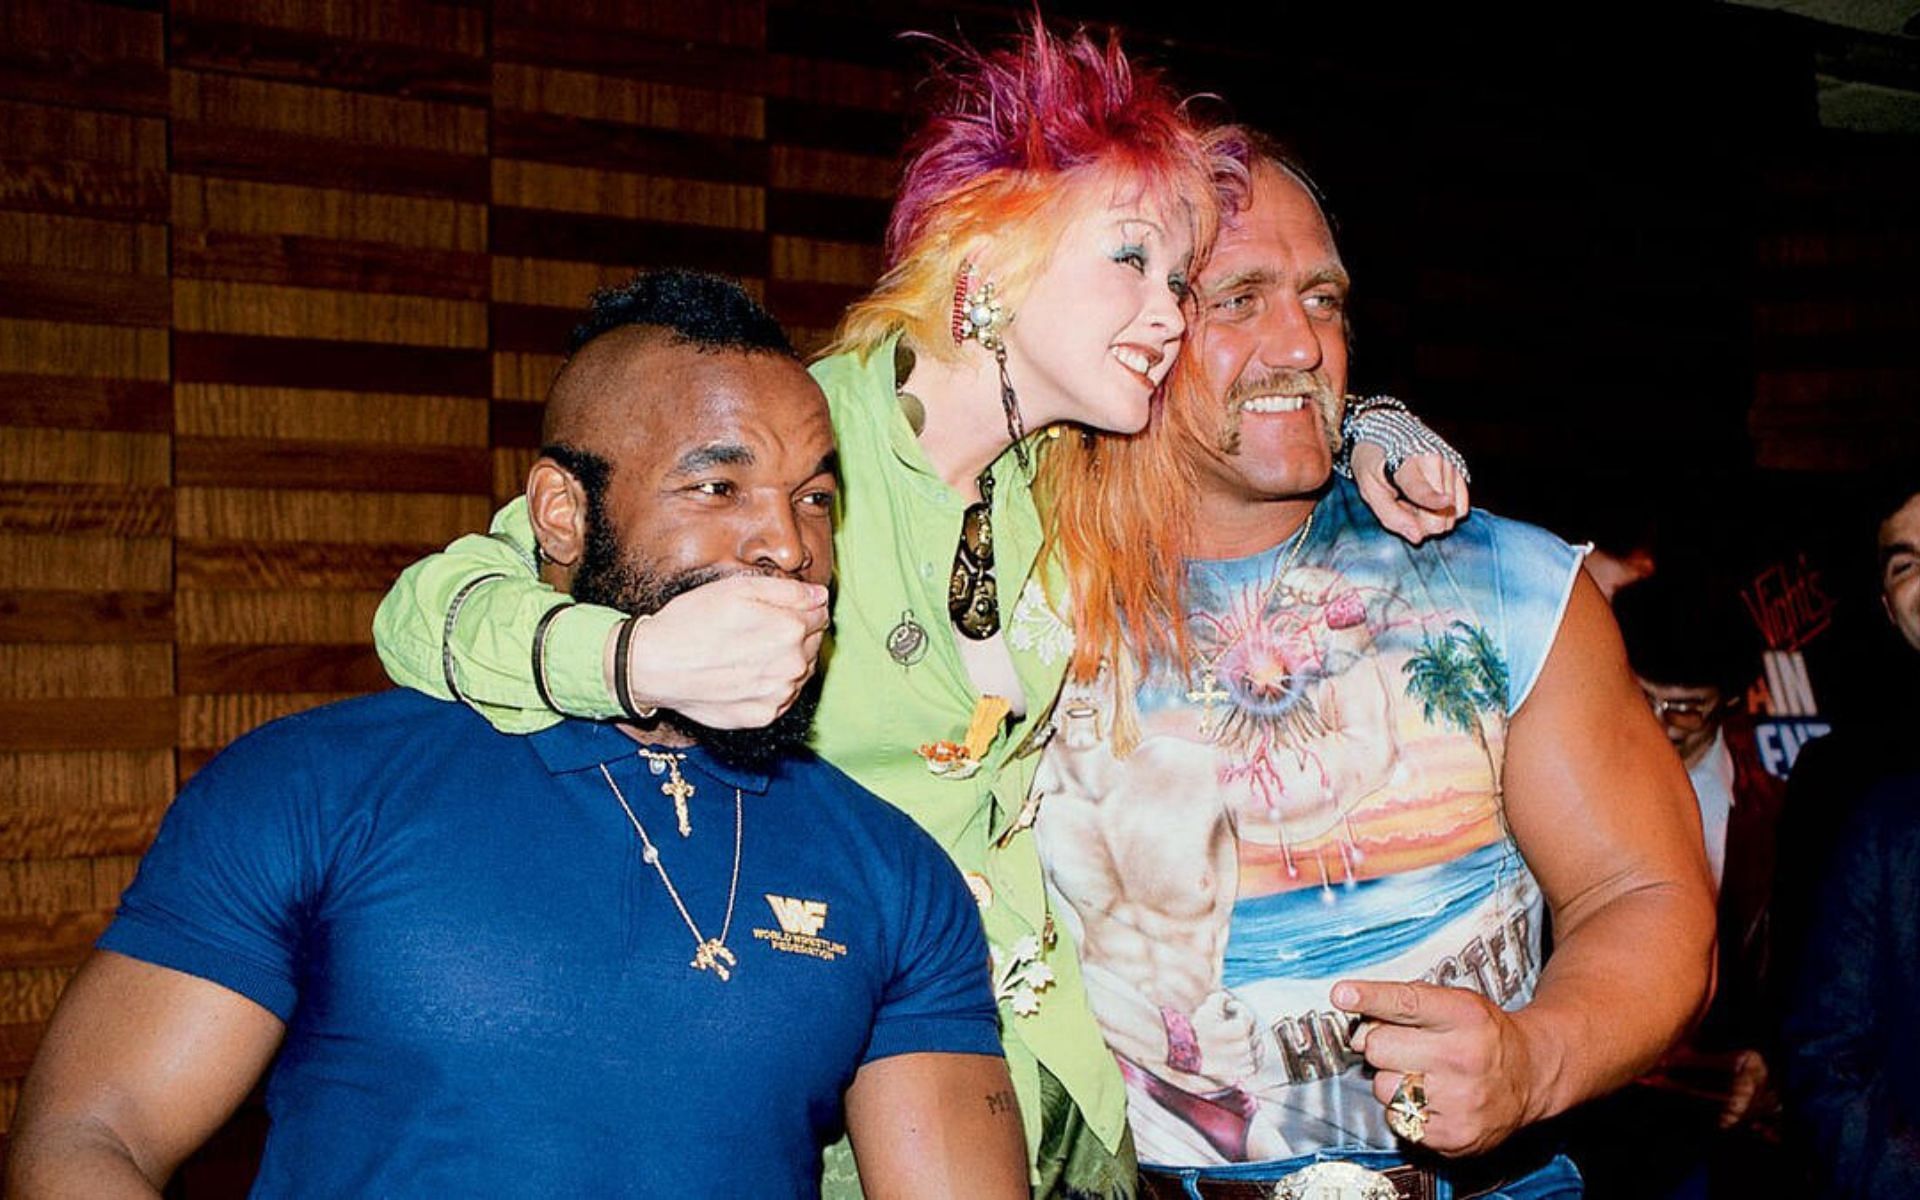 Cyndi Lauper helped bring WWF into the mainstream!